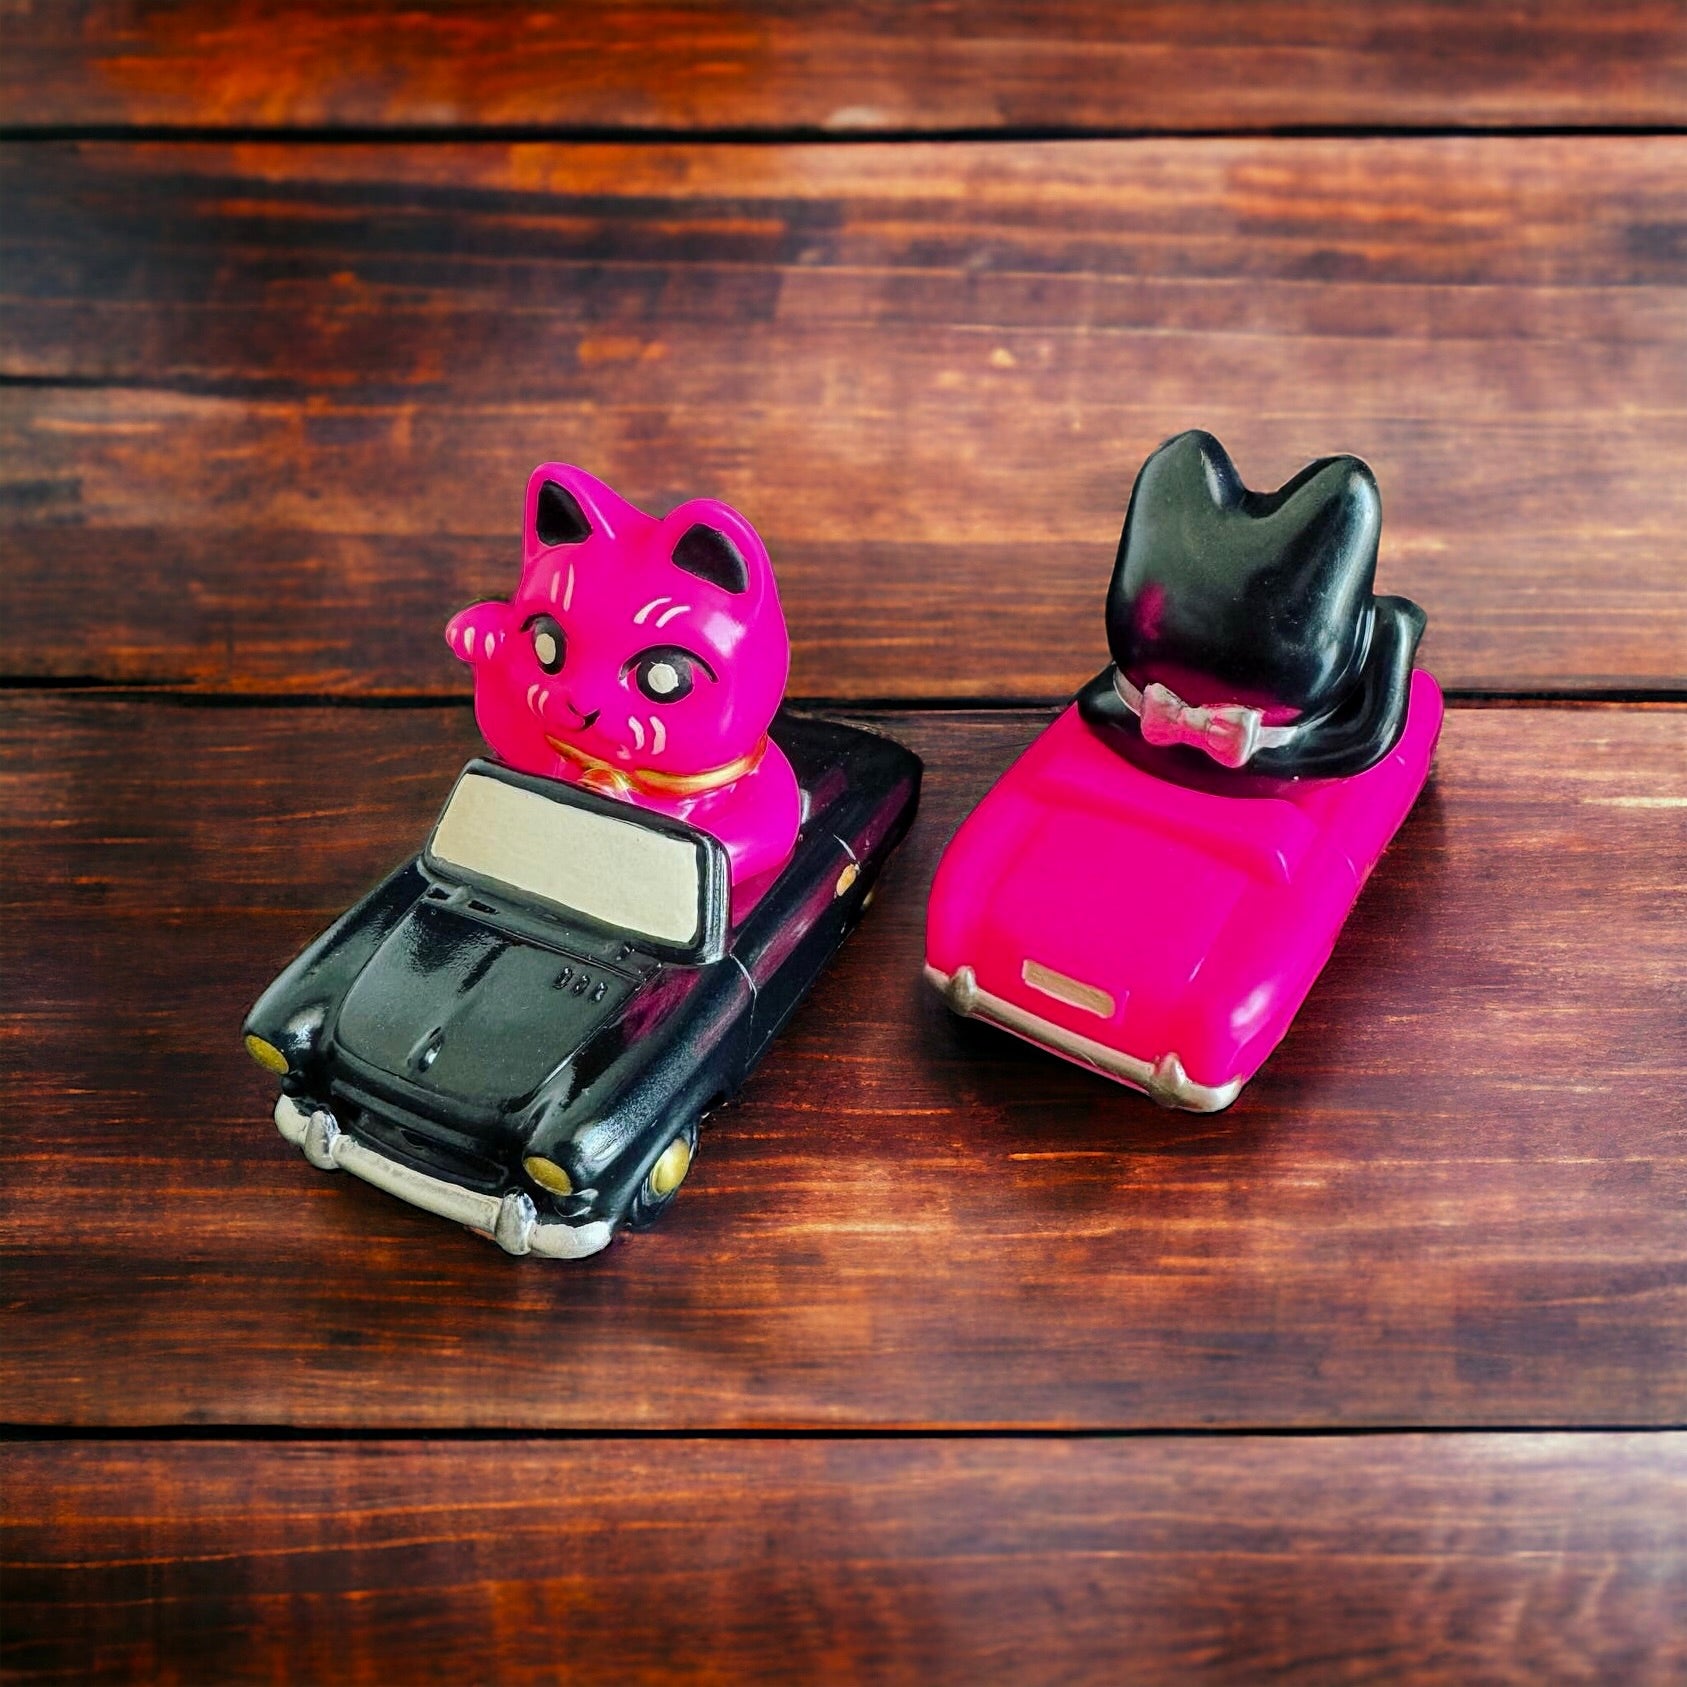 A vinyl Lucky Kitty Car toy on a wooden table, surrounded by toy cars and a cat figurine. Size: 7.5X.5cm. Blind Bagged. From Strangecat Toys.